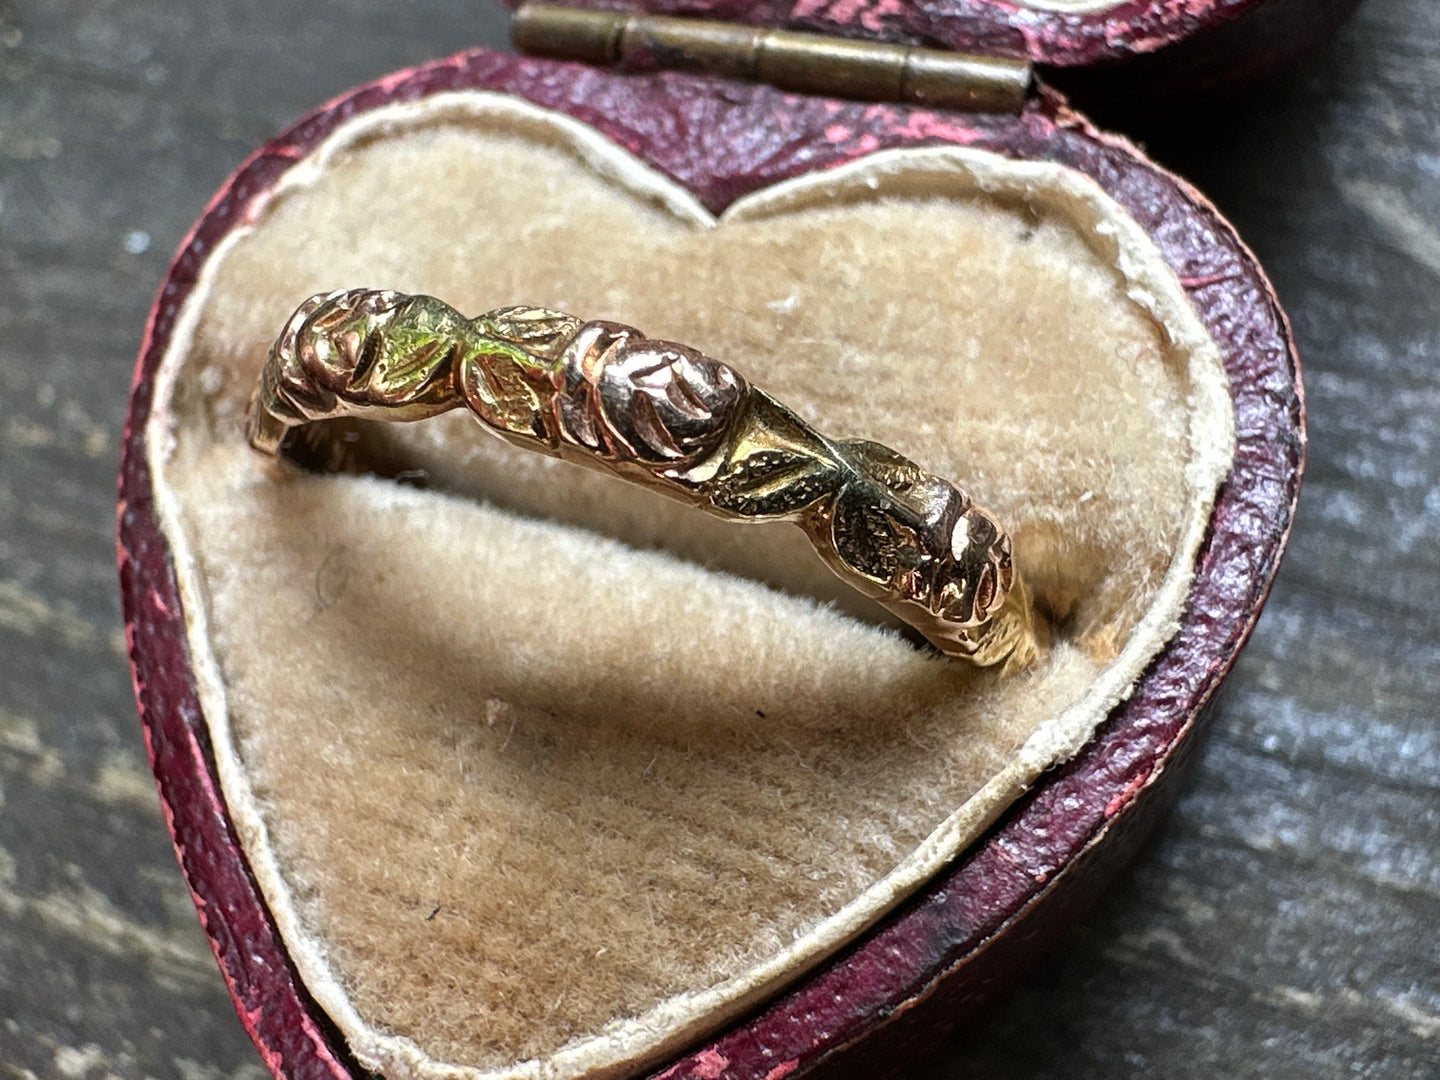 ANTIQUE FLOWER AND LEAVES BAND IN 14KT GOLD BY JABEL